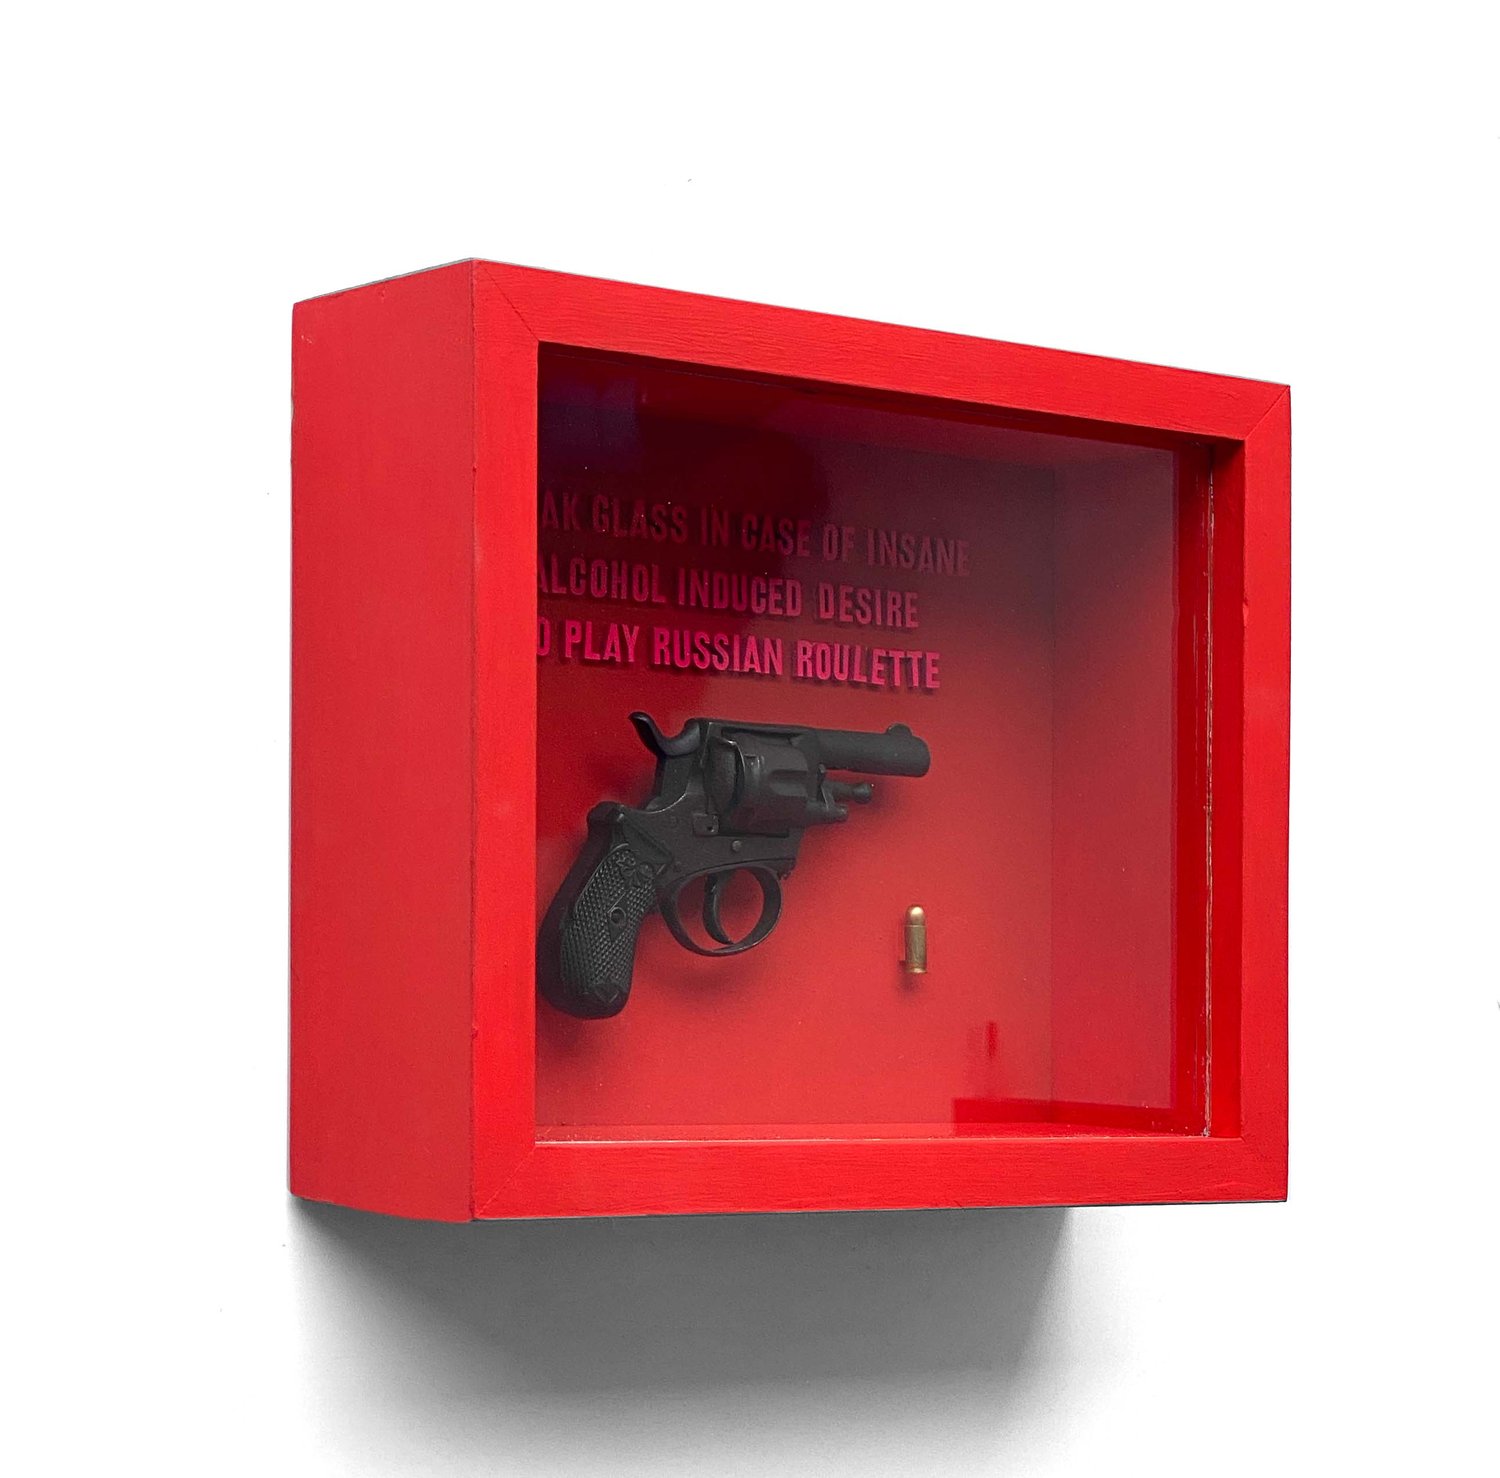 Image of 'Break glass in case of insane alcohol induced desire to play Russian roulette #4' by Hackney Dave